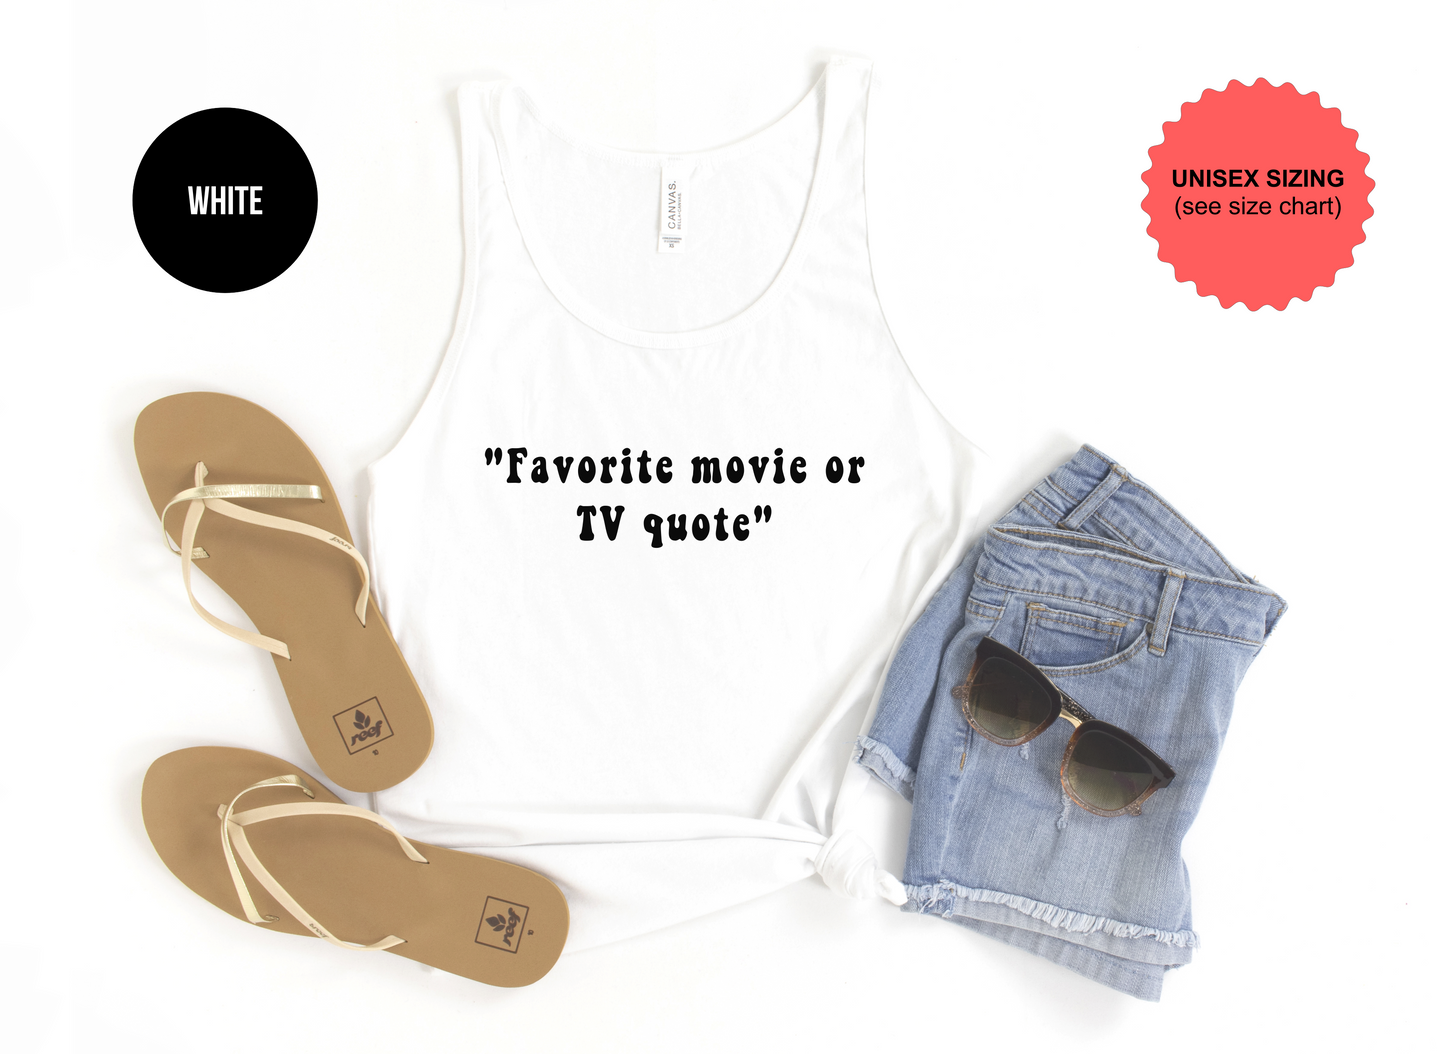 Movie or TV Quote Tank Top